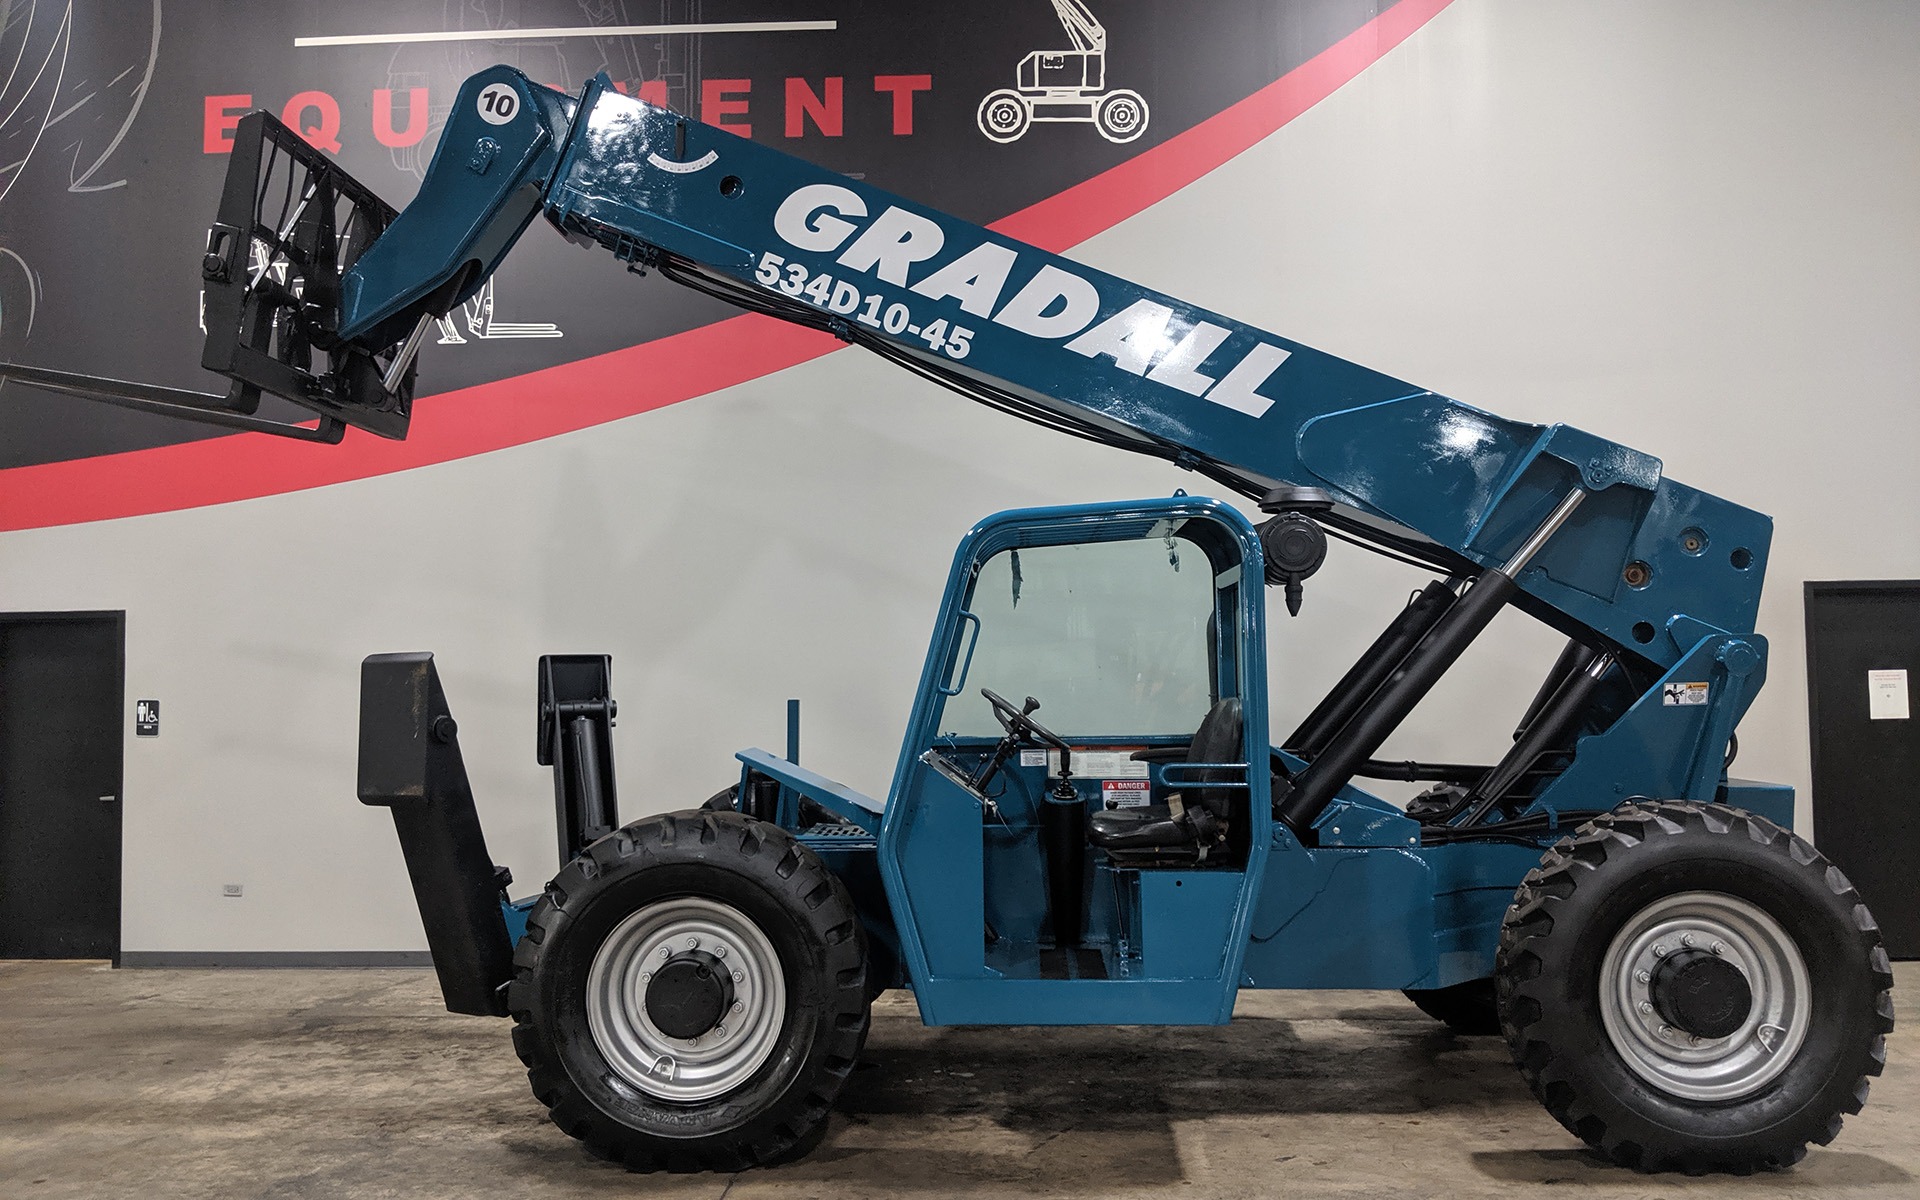 Used 2006 GRADALL 534D-10  | Cary, IL